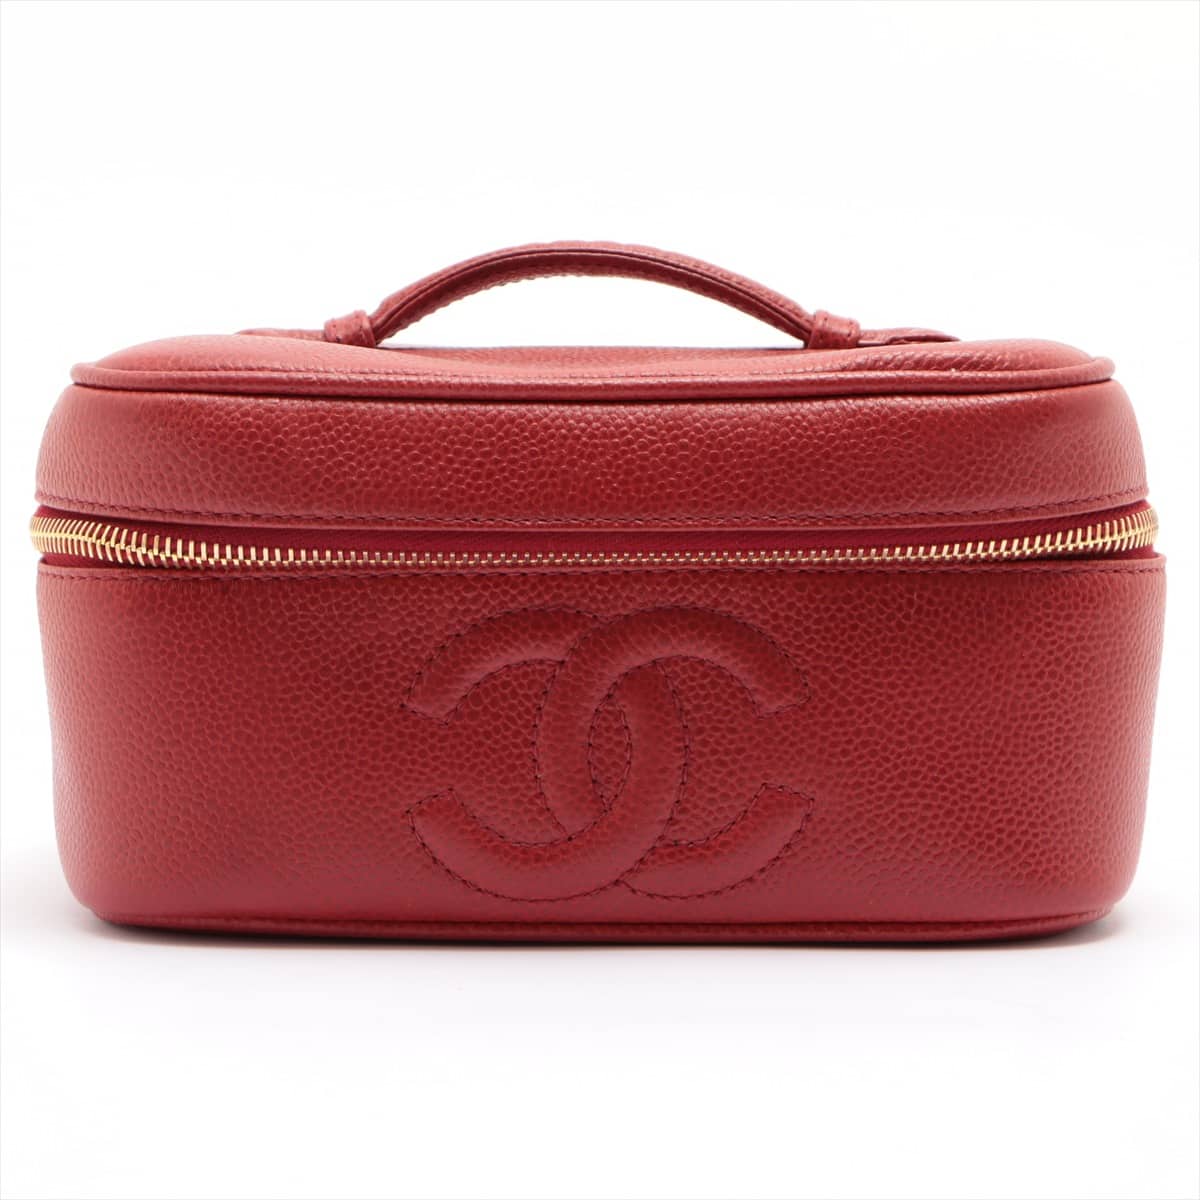 Chanel Coco Mark Caviarskin Vanity bag Red Gold Metal fittings 4XXXXXX